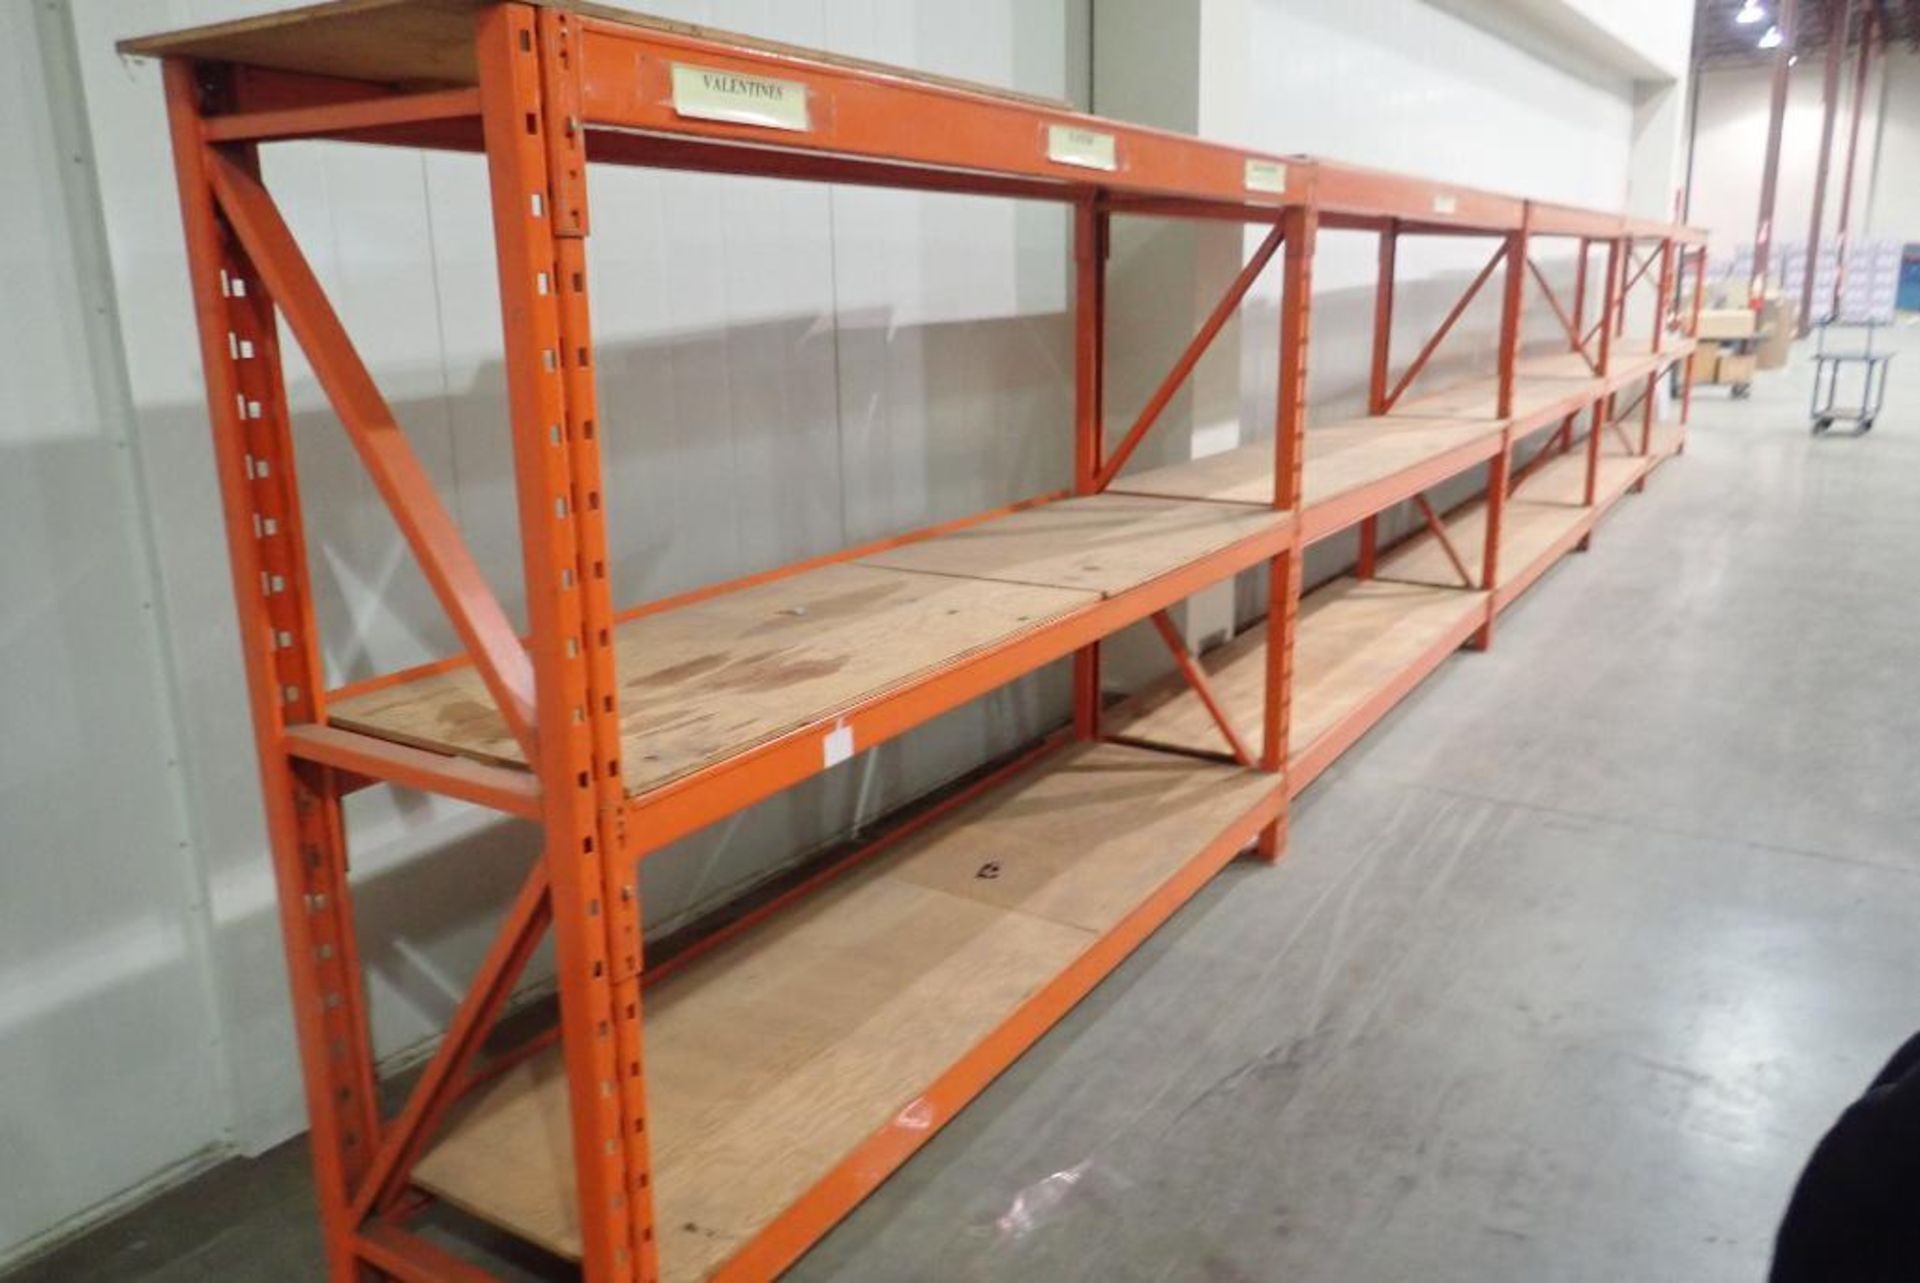 Lot of (5) Sections 7'6"x24"x69" Pallet Racking w/Decking.